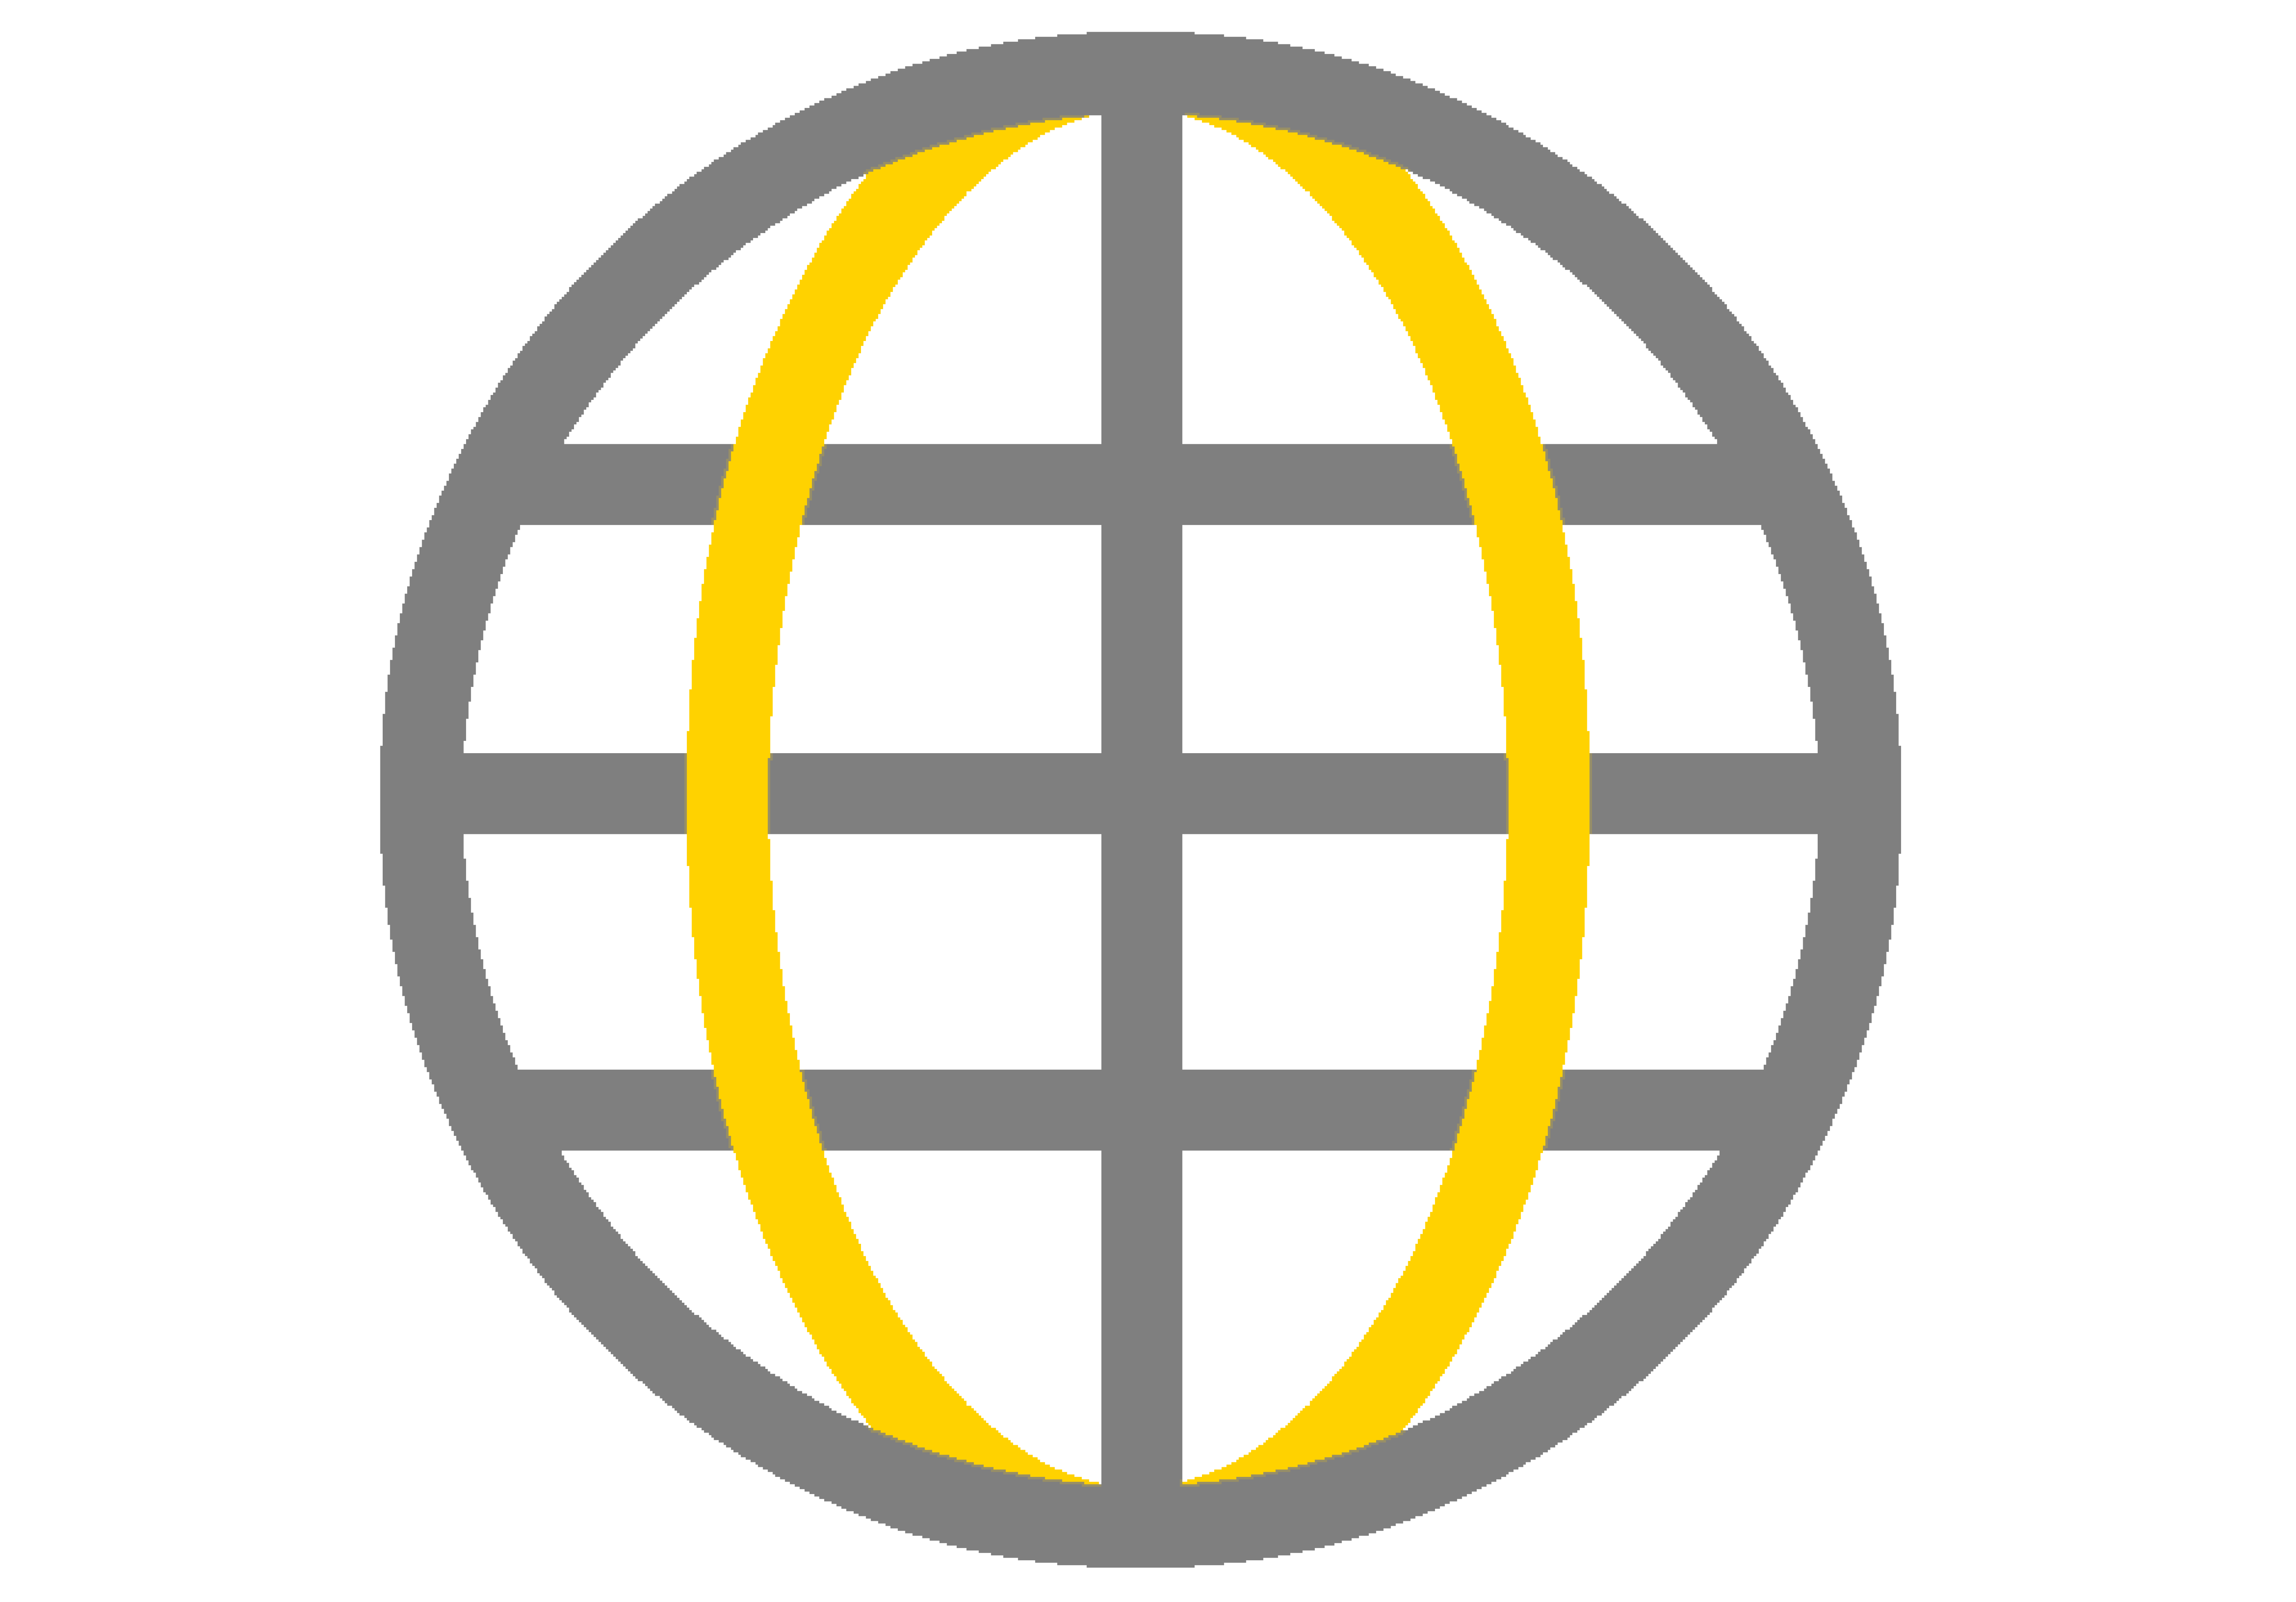 An Icon of a globe with yellow and grey coordinate lines.